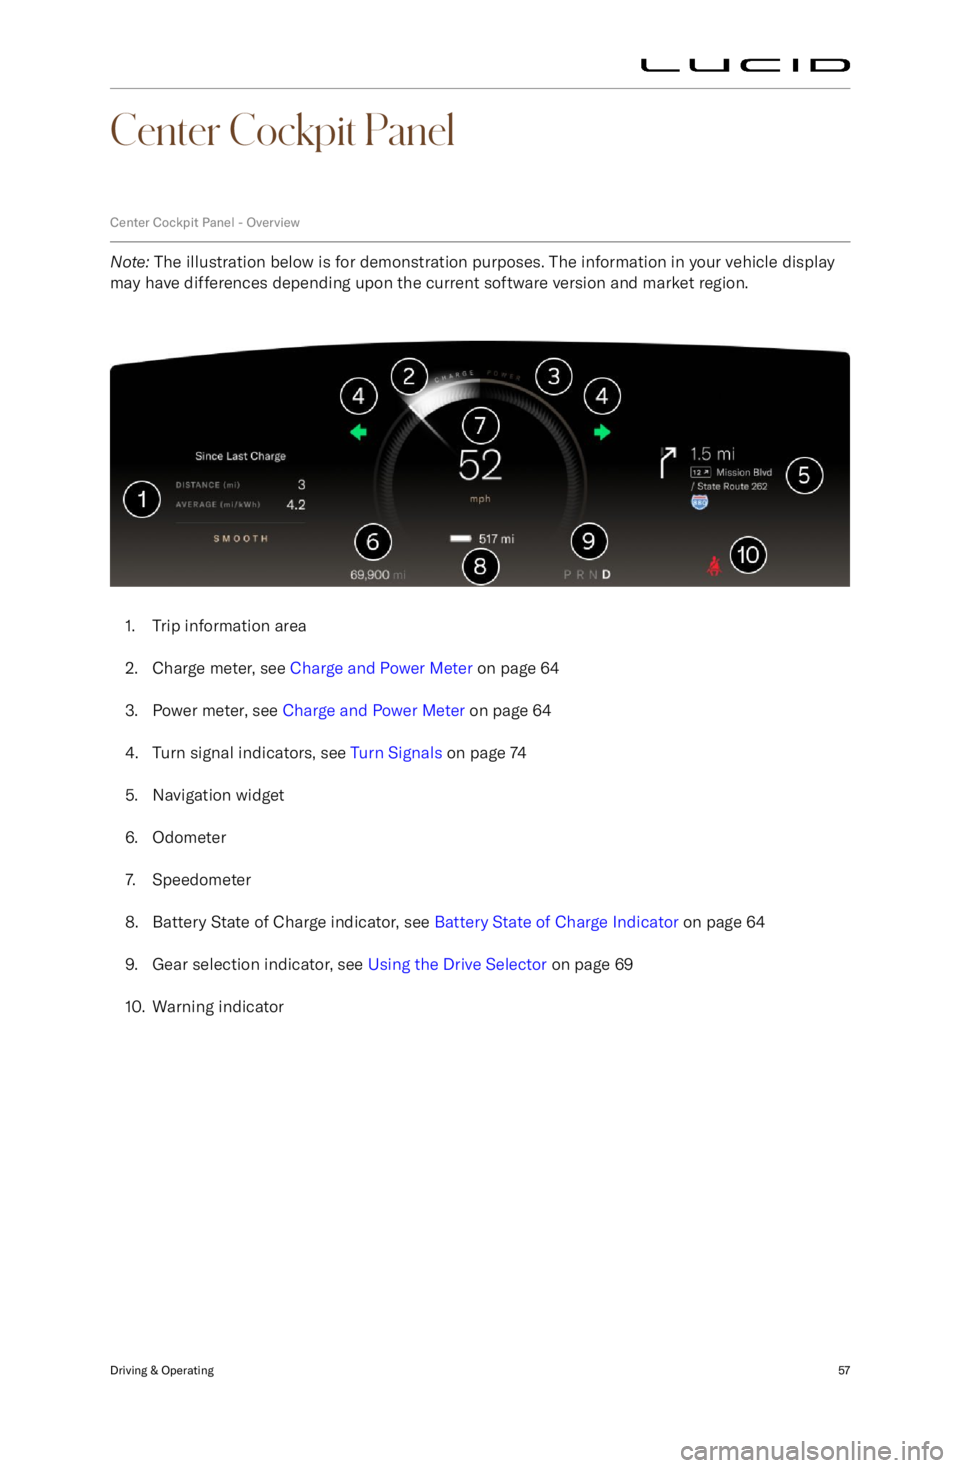 LUCID AIR 2023  Owners Manual Center Cockpit Panel
Center Cockpit Panel - Overview
Note: The illustration below is for demonstration purposes. The information in your vehicle display
may have differences depending upon the current